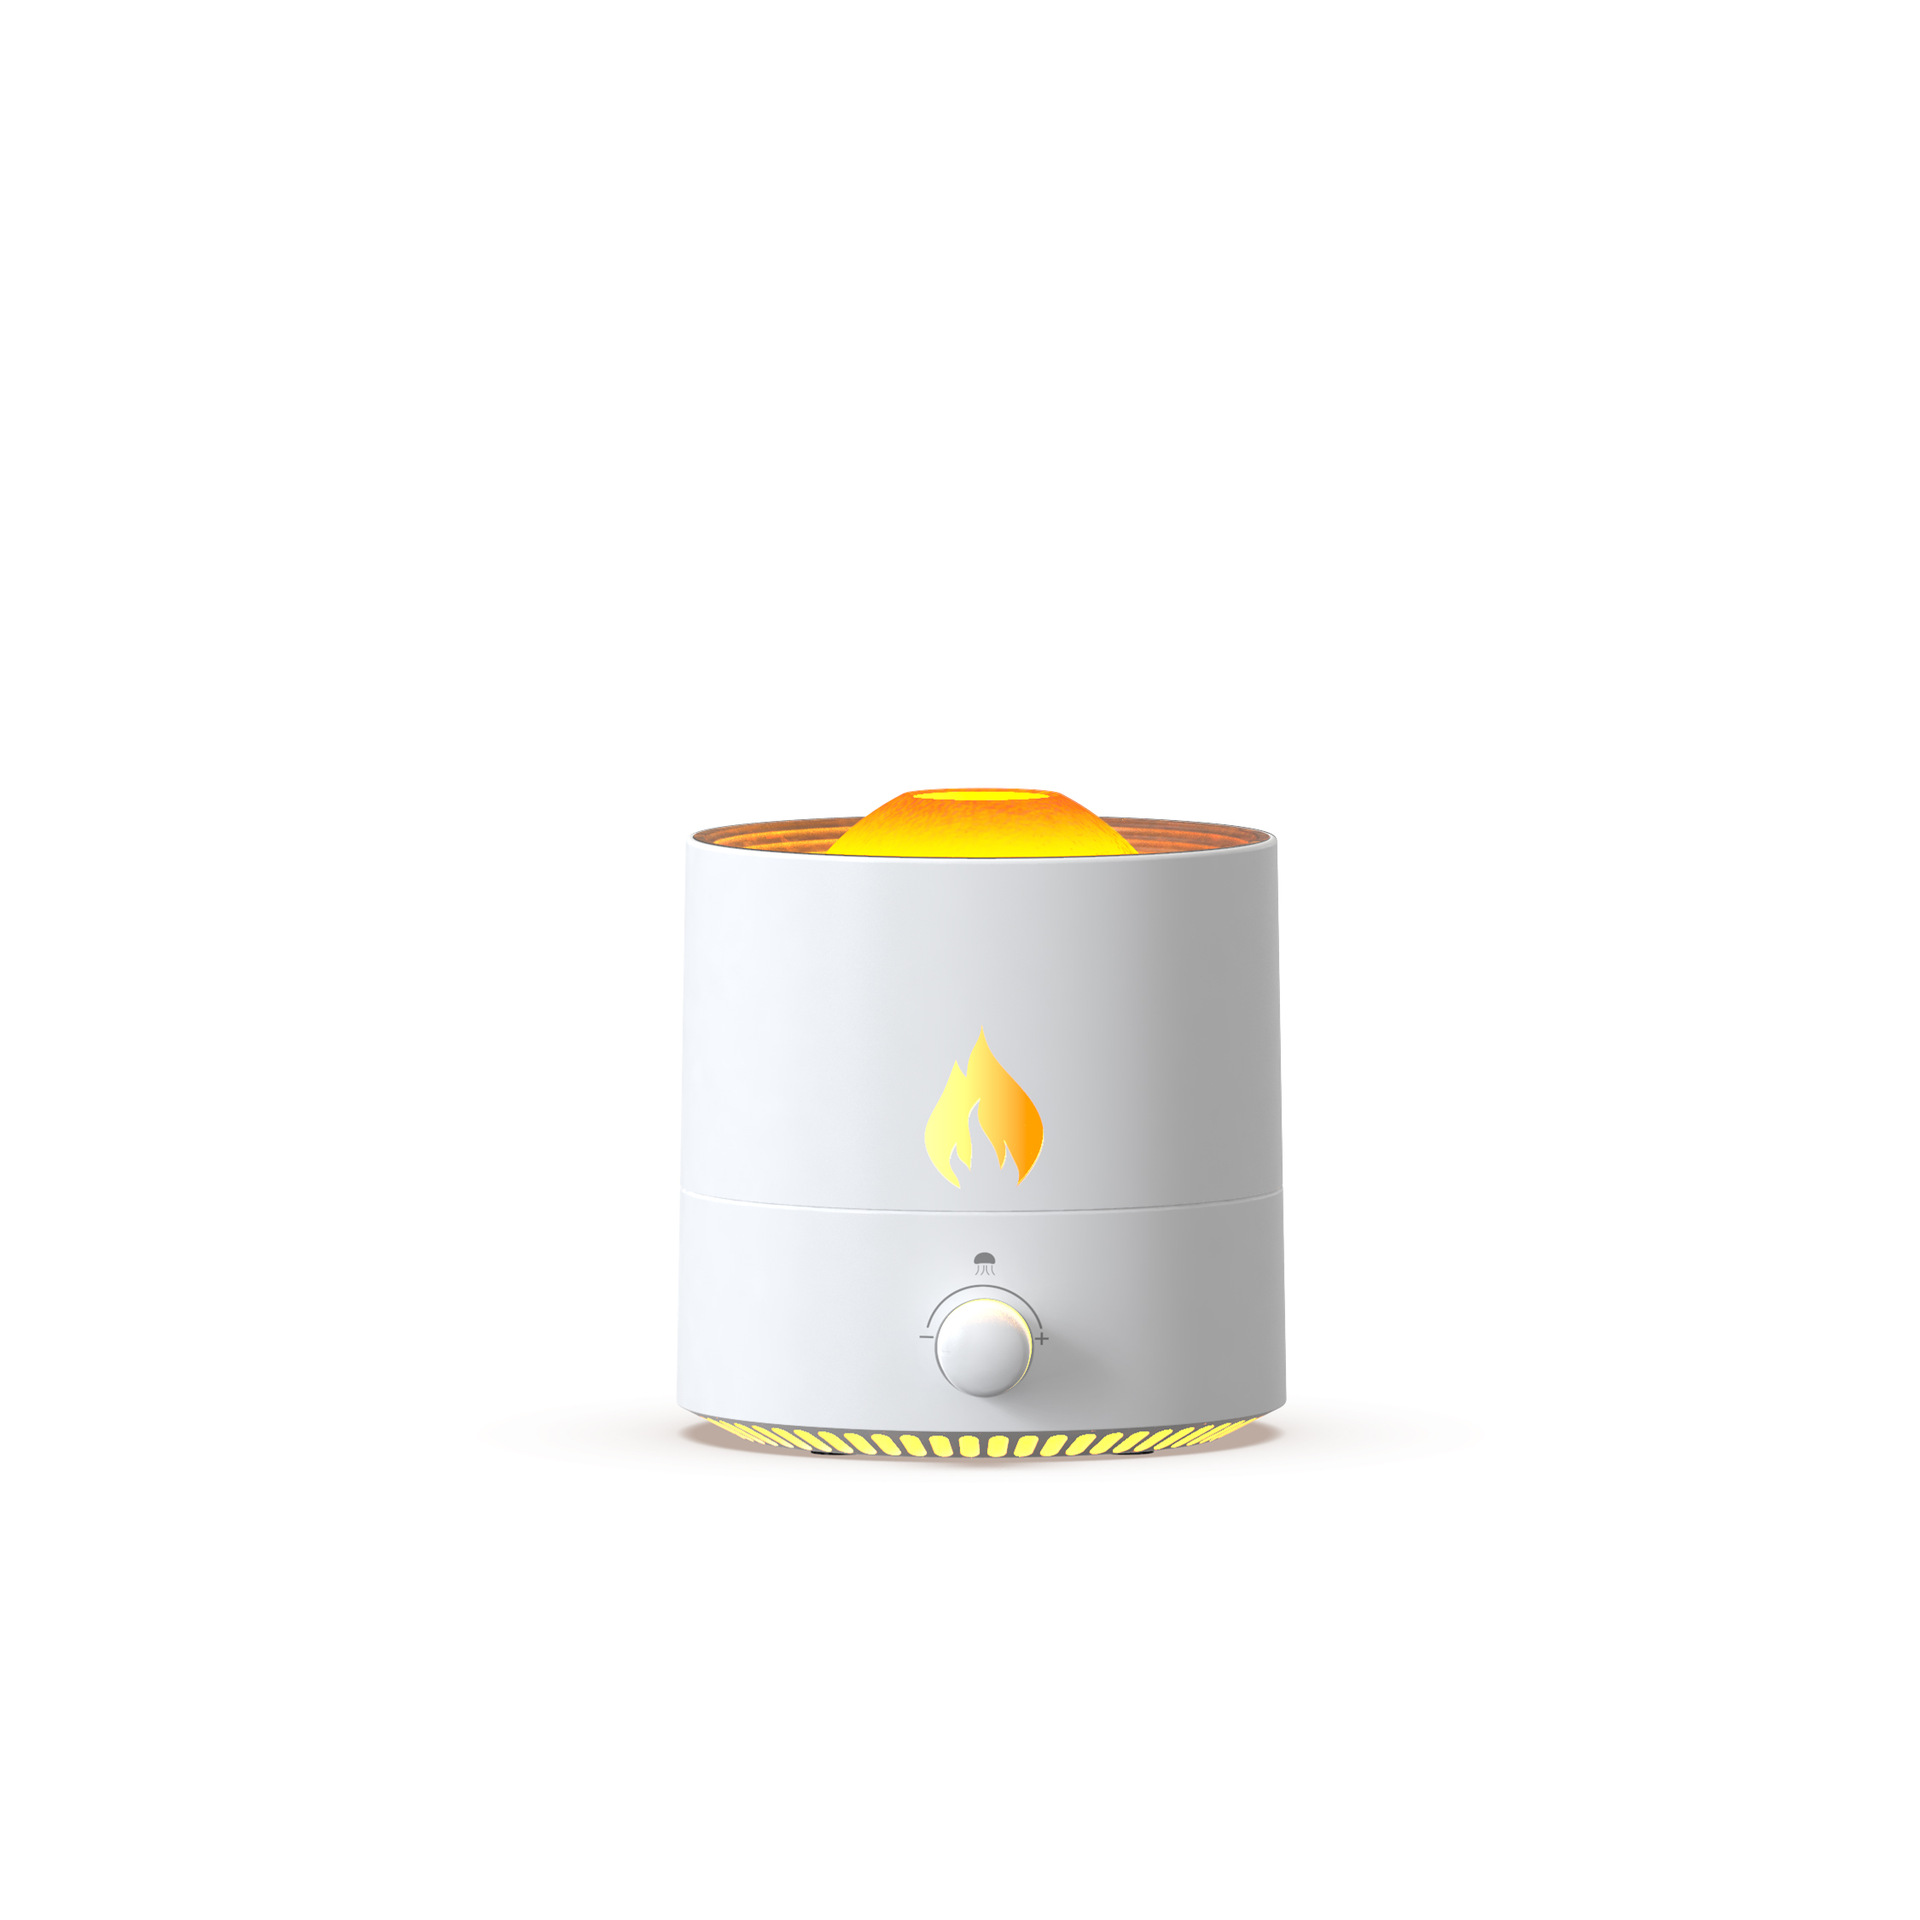 Several Poems Simulation Flame Jellyfish Aroma Diffuser USB Mini Spit Smoke Ring Humidifier Large Capacity Aromatherapy Ultrasonic Aroma Diffuser